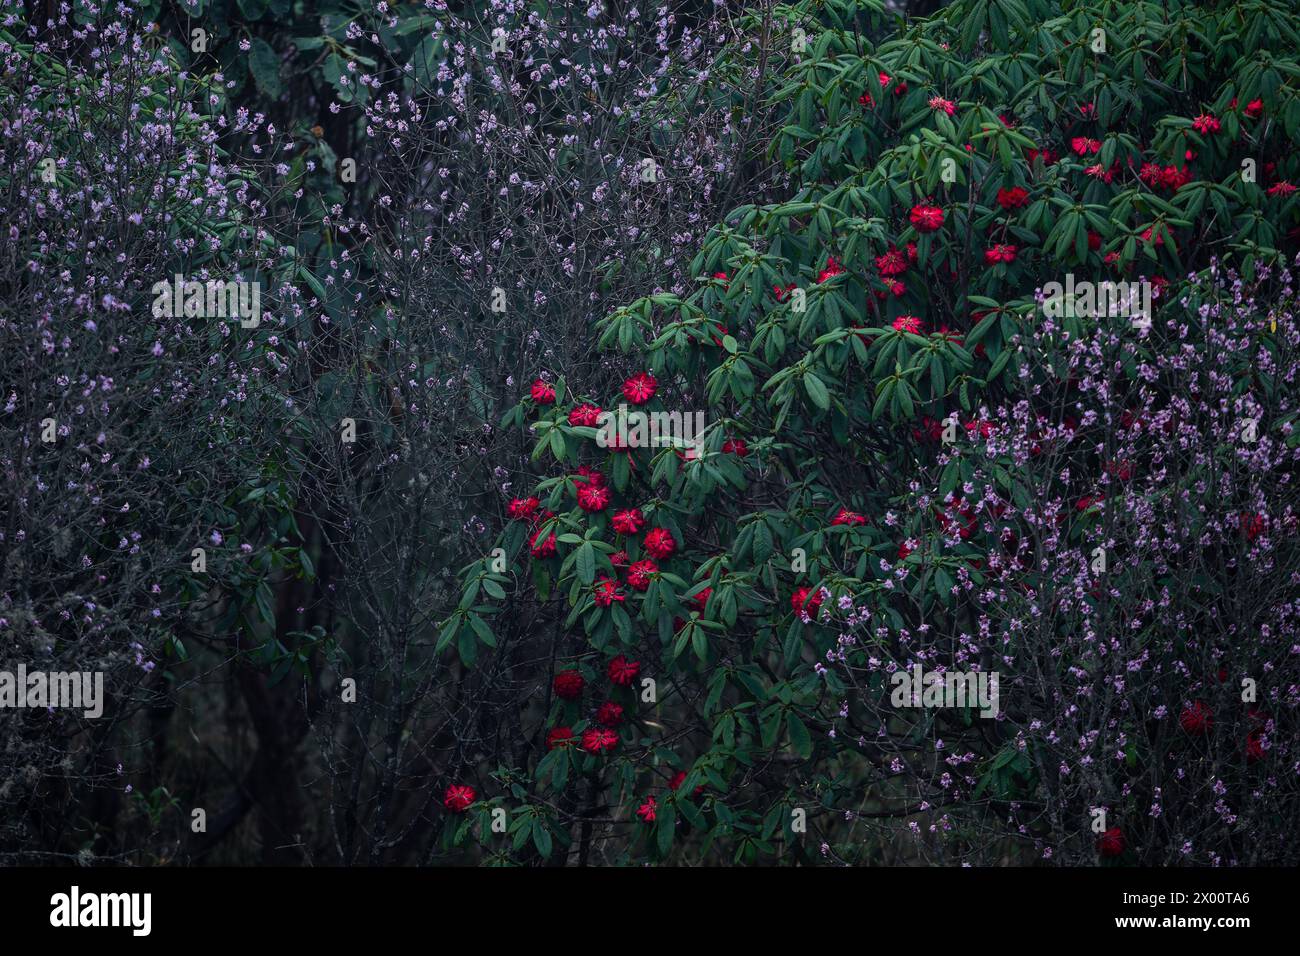 Naturally blooming rhododendron and daphne flowers in the forests of Singalila National Park, West Bengal, India during spring season Stock Photo